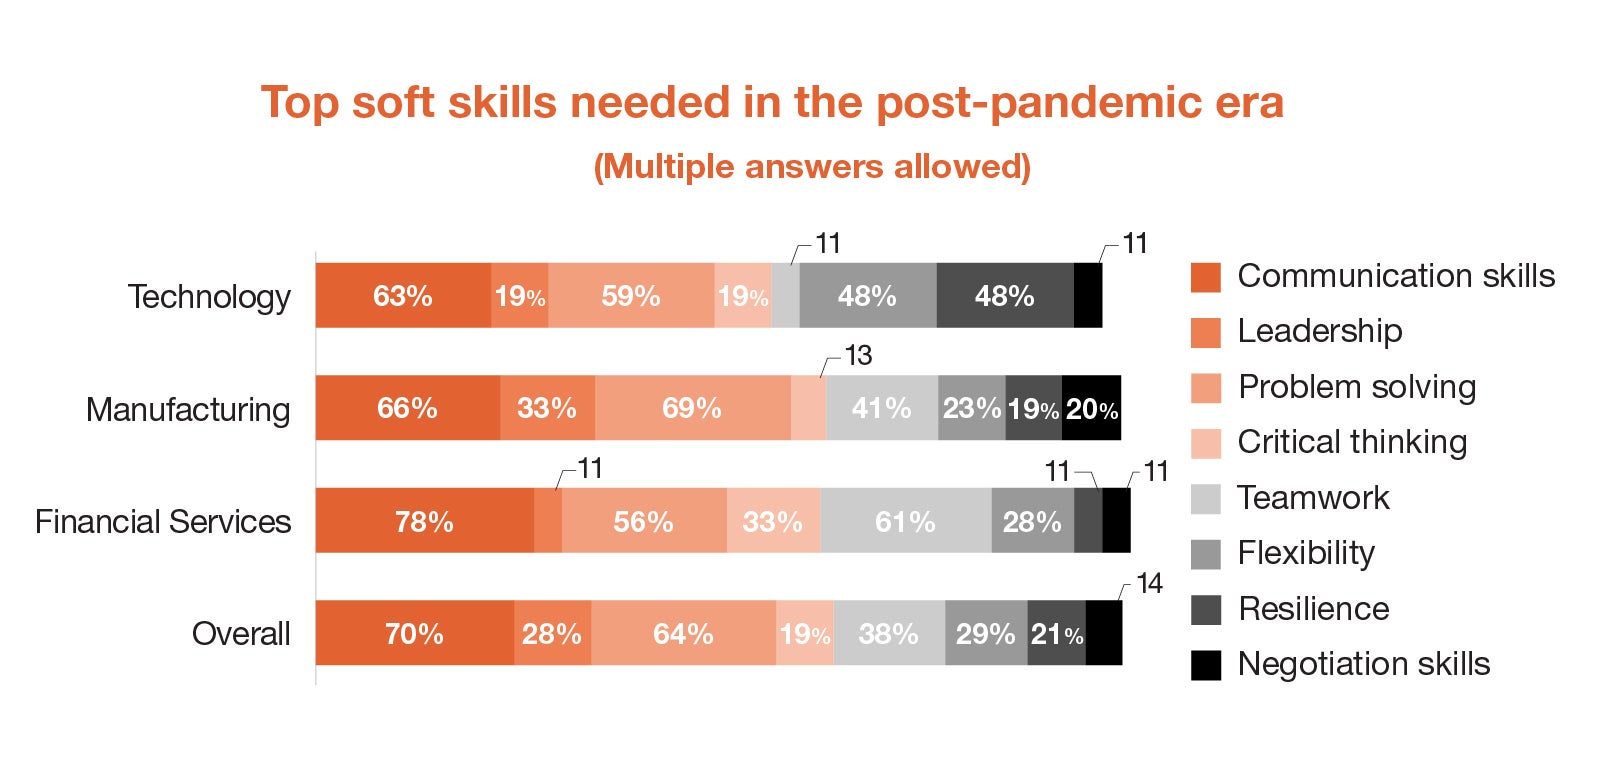 Top soft skills needed in the post-pandemic era